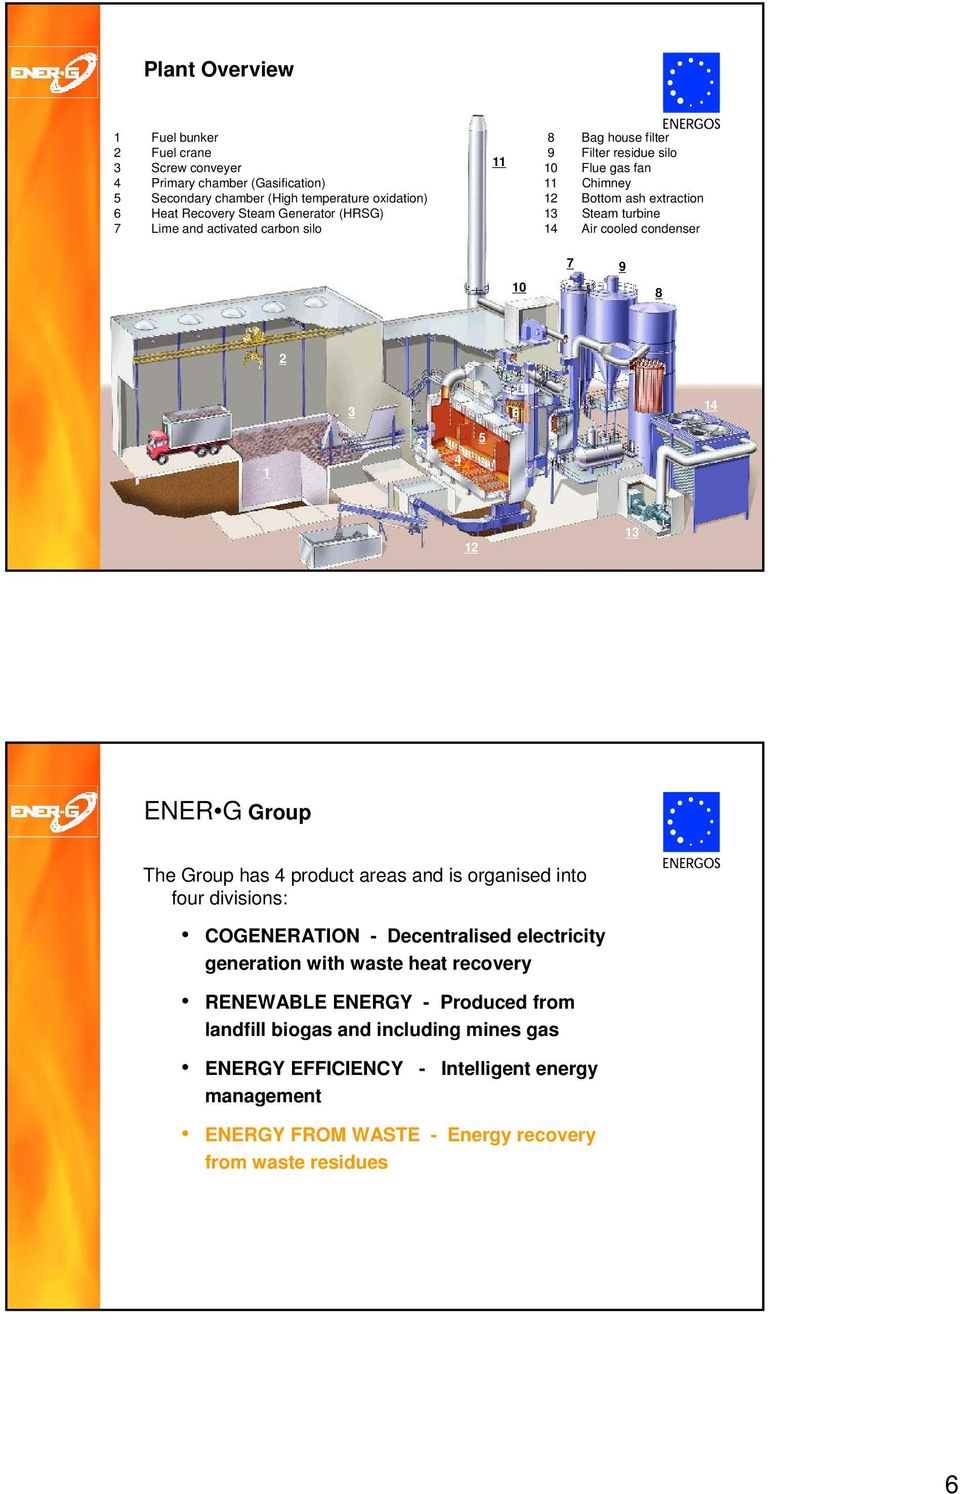 2 3 6 14 5 1 4 12 13 ENER G Group The Group has 4 product areas and is organised into four divisions: COGENERATION - Decentralised electricity generation with waste heat recovery